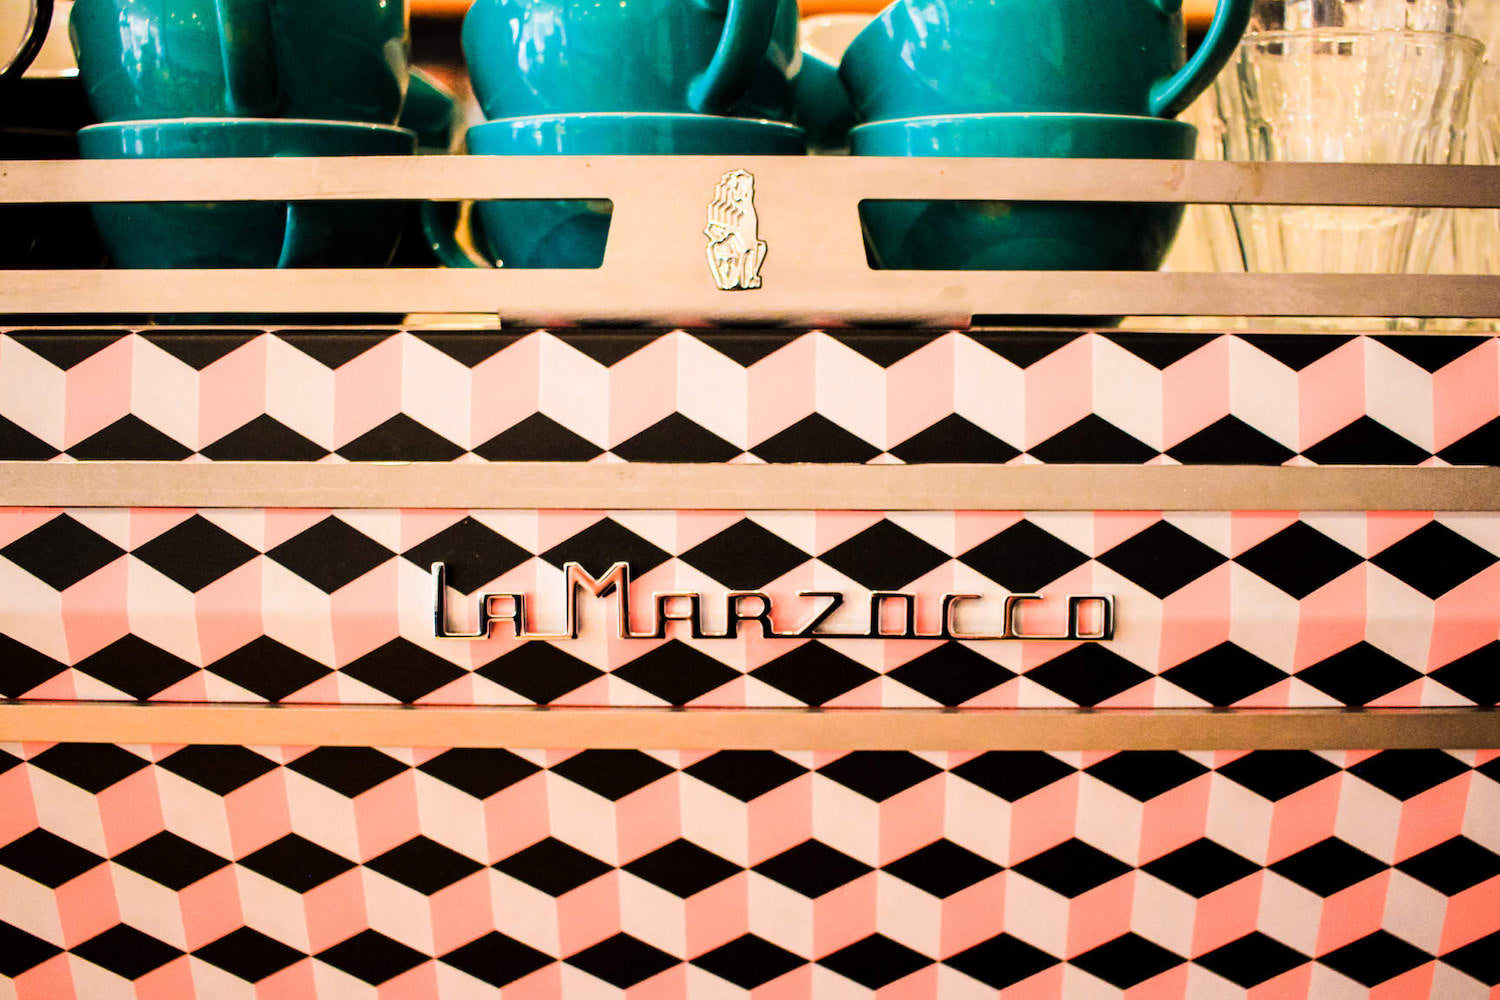 A customised pink and black cubes La Marzocco coffee machine, serving Missing Bean wholesale coffee